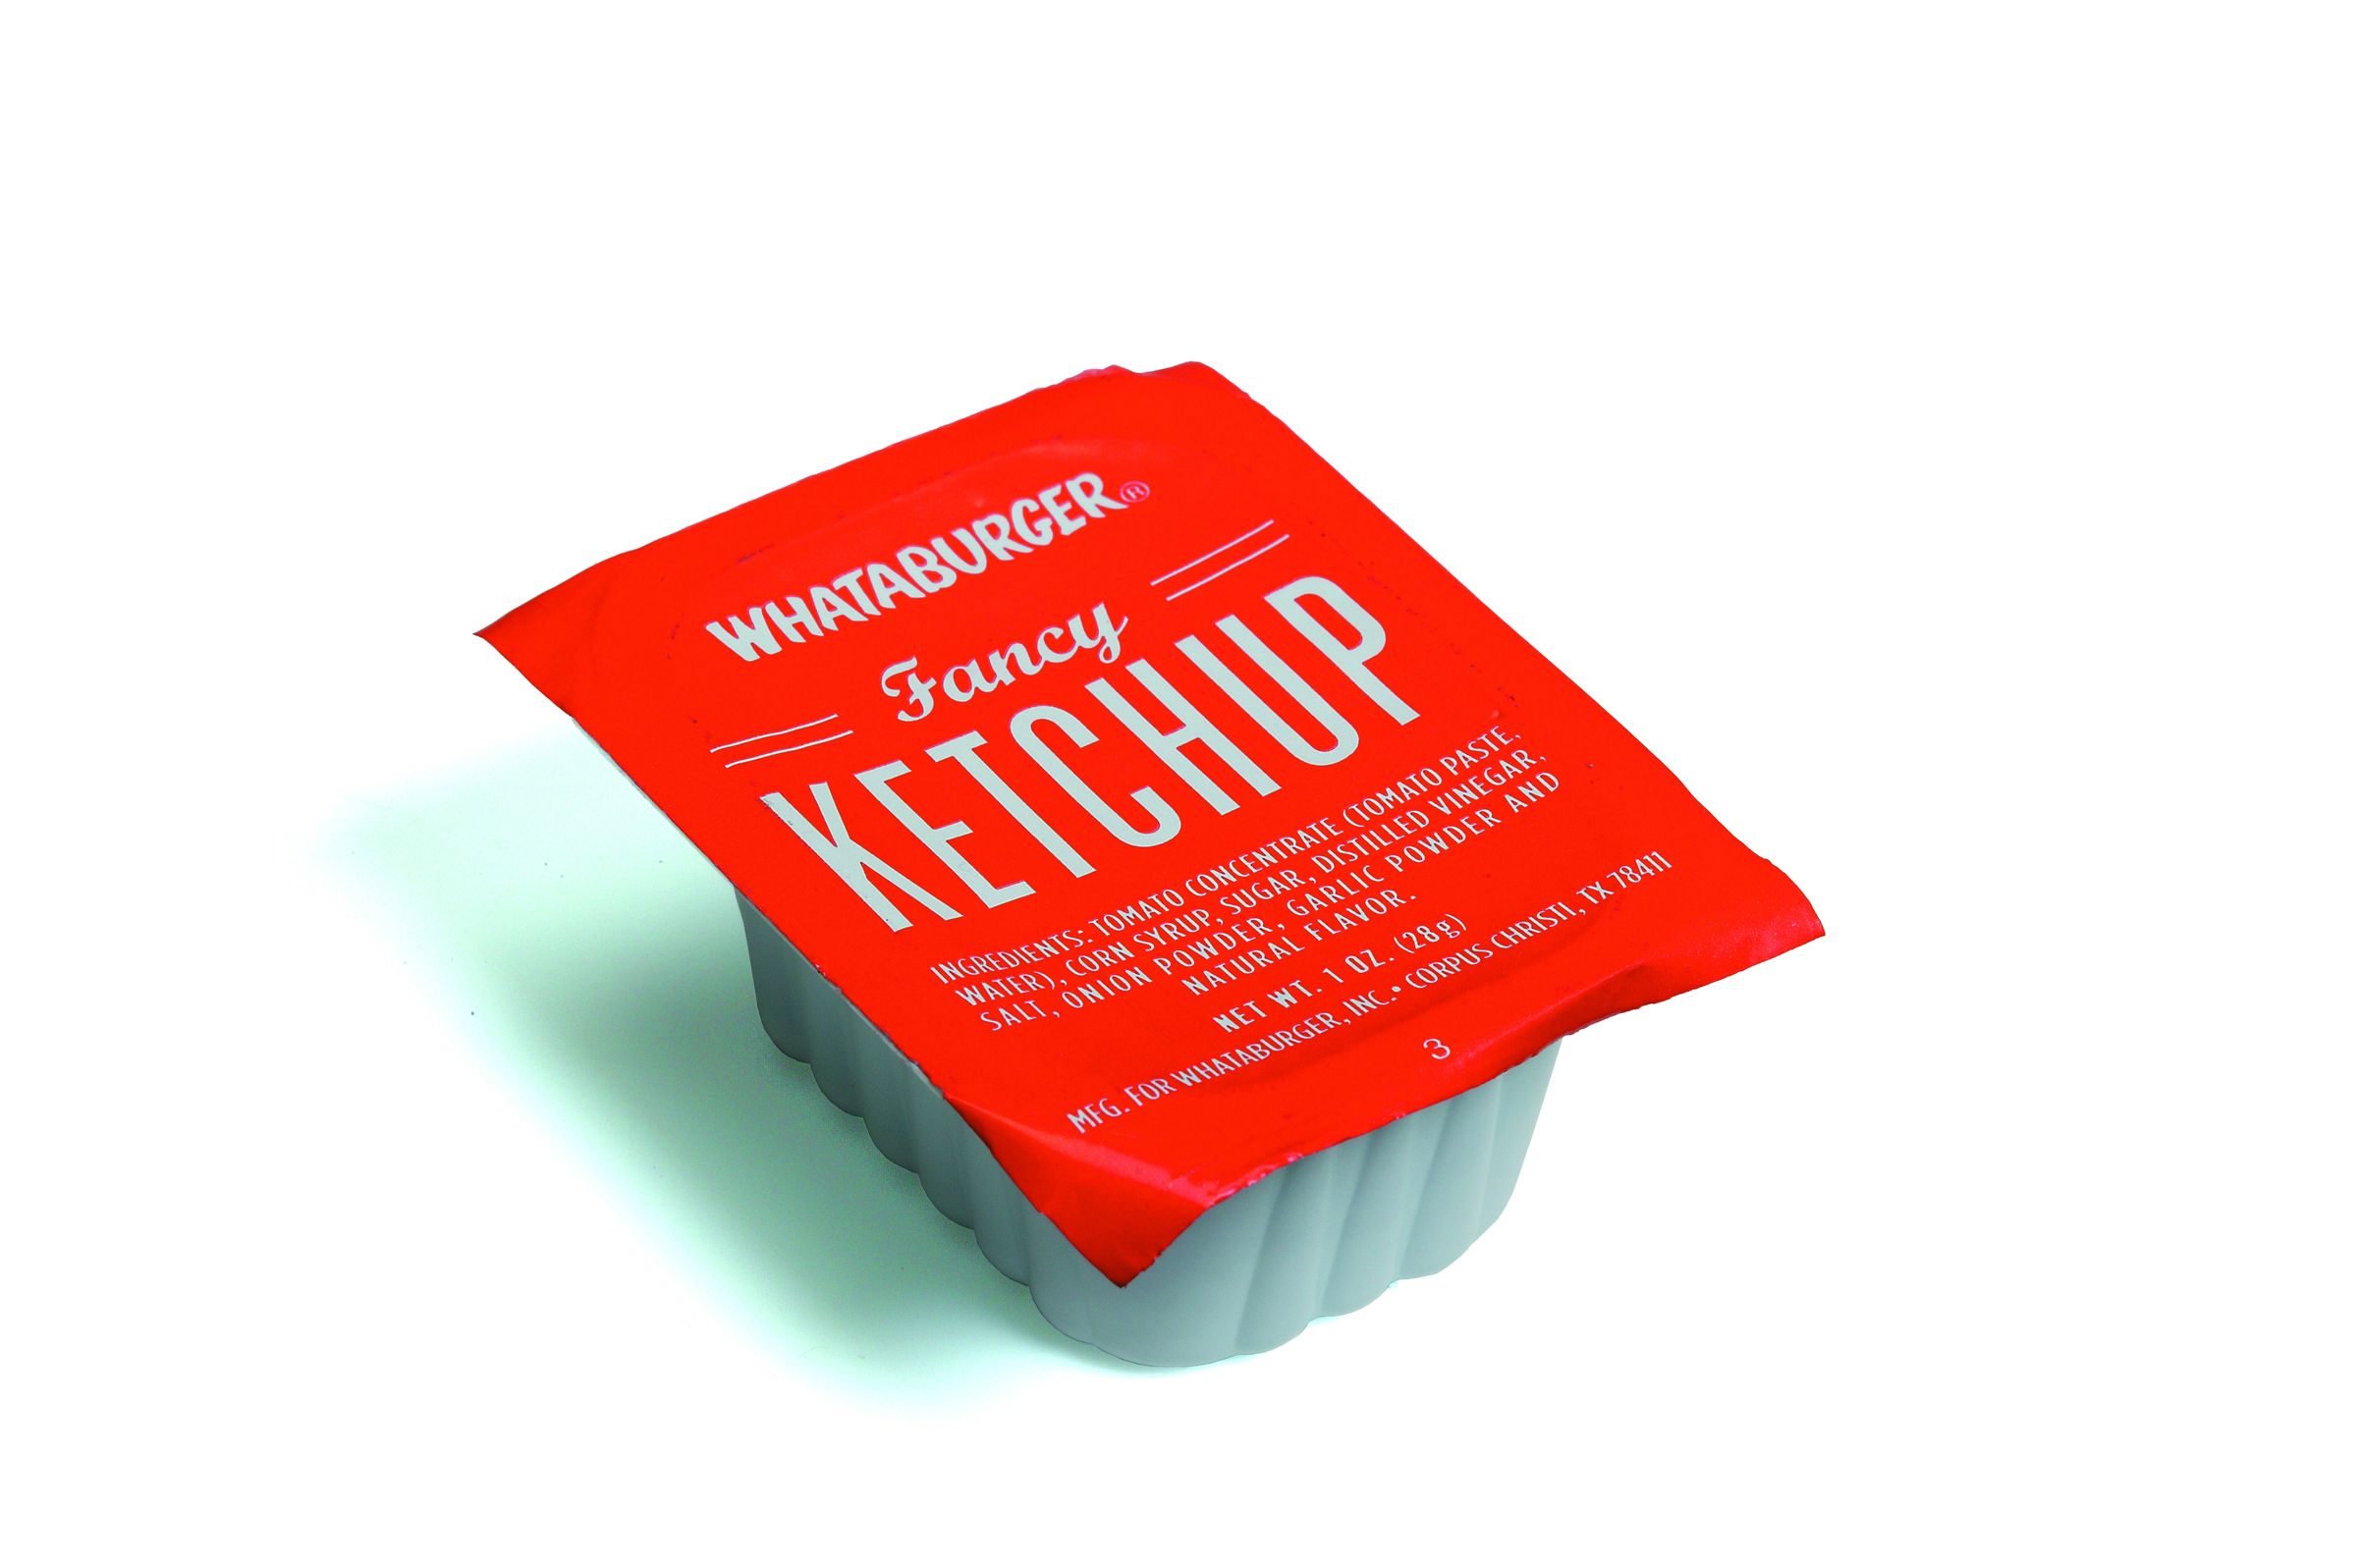 What does the number on the bottom of the ketchups mean? : r/Whataburger